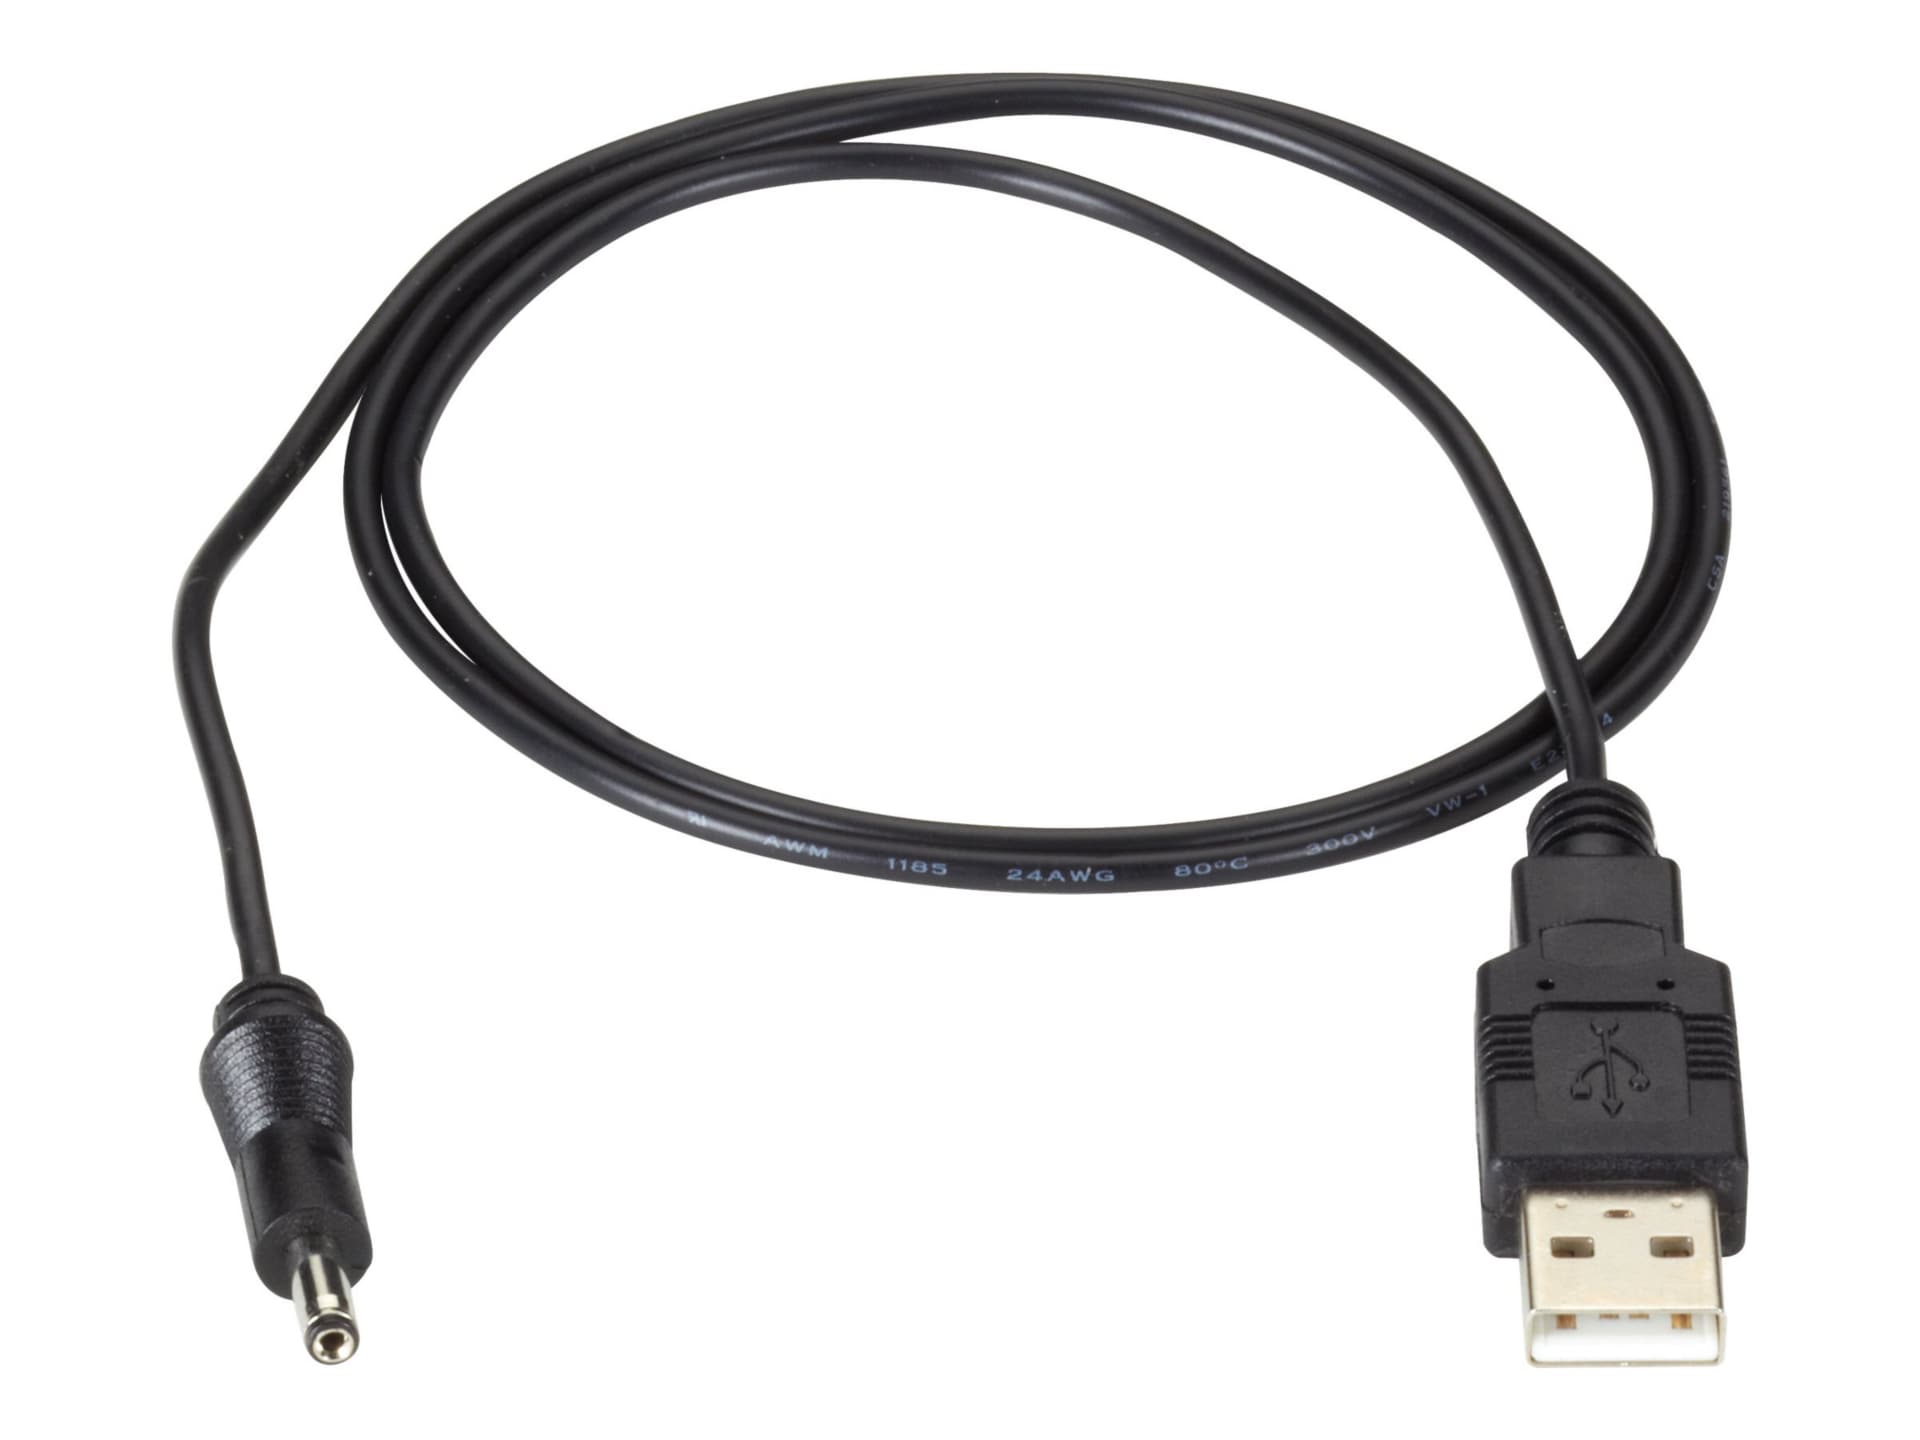 Black Box USB Power Cable - power cable - USB to DC jack 1.35 mm - 80 cm